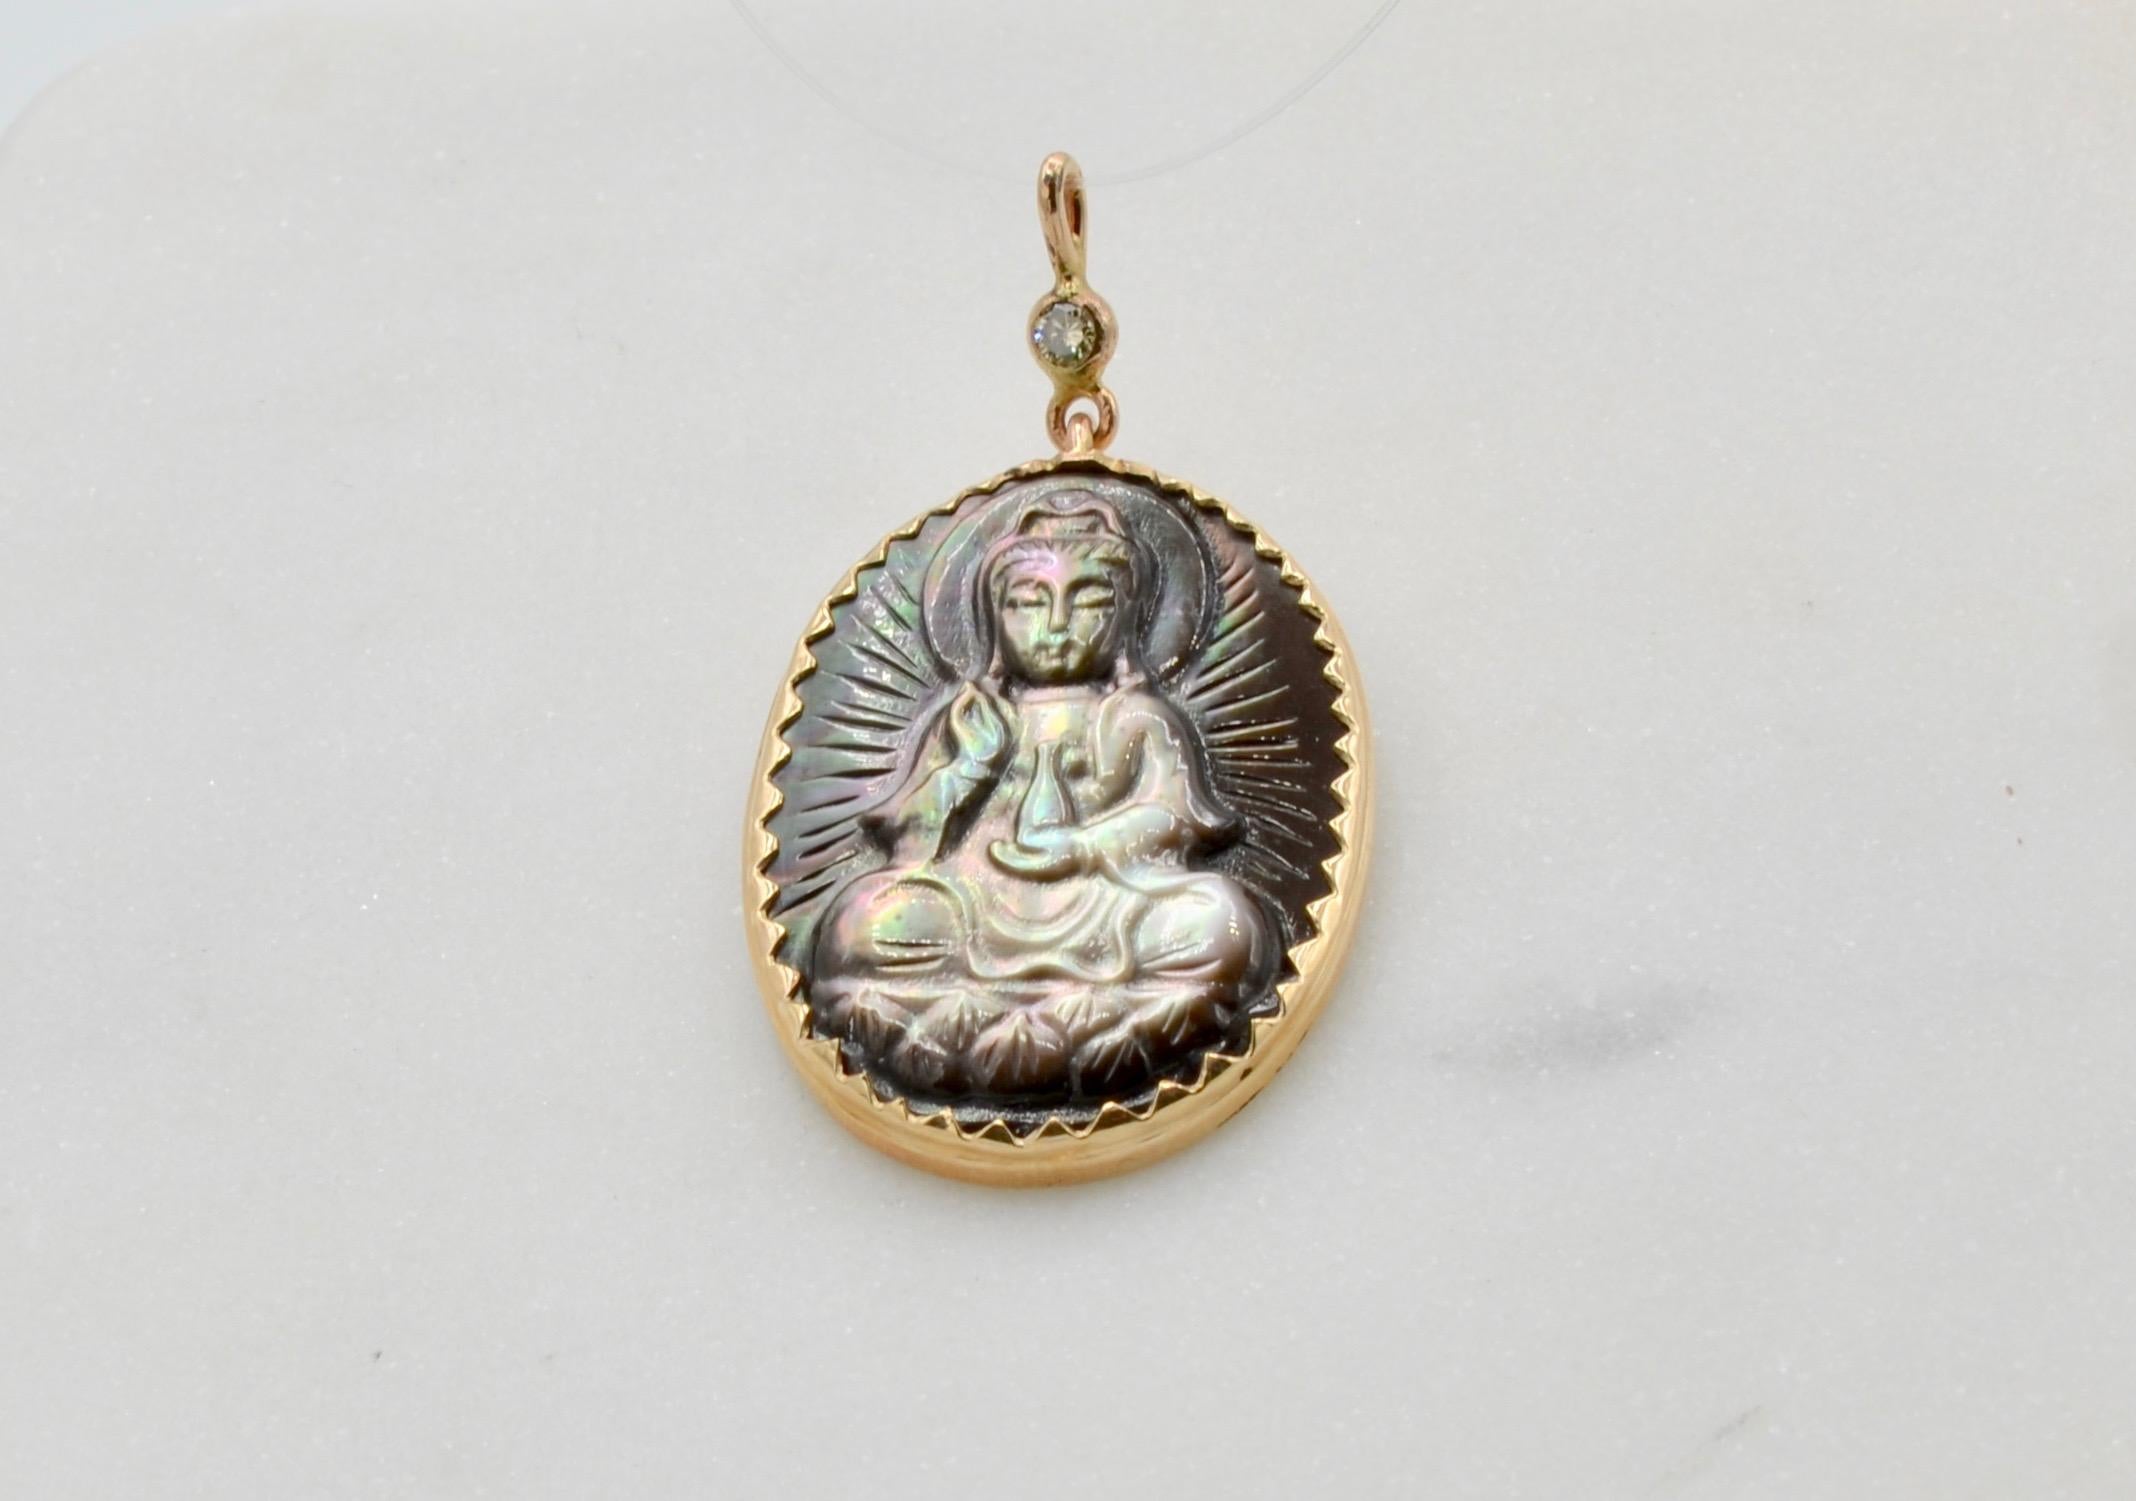 This black Mother of Pearl has hand carving of Buddha set in 14 karat gold with 0.05 carat diamond bale. It is a beautiful pendant that can be worn on a gold chain or as a choker on a black ribbon. The chain in the photo can be purchased separately.